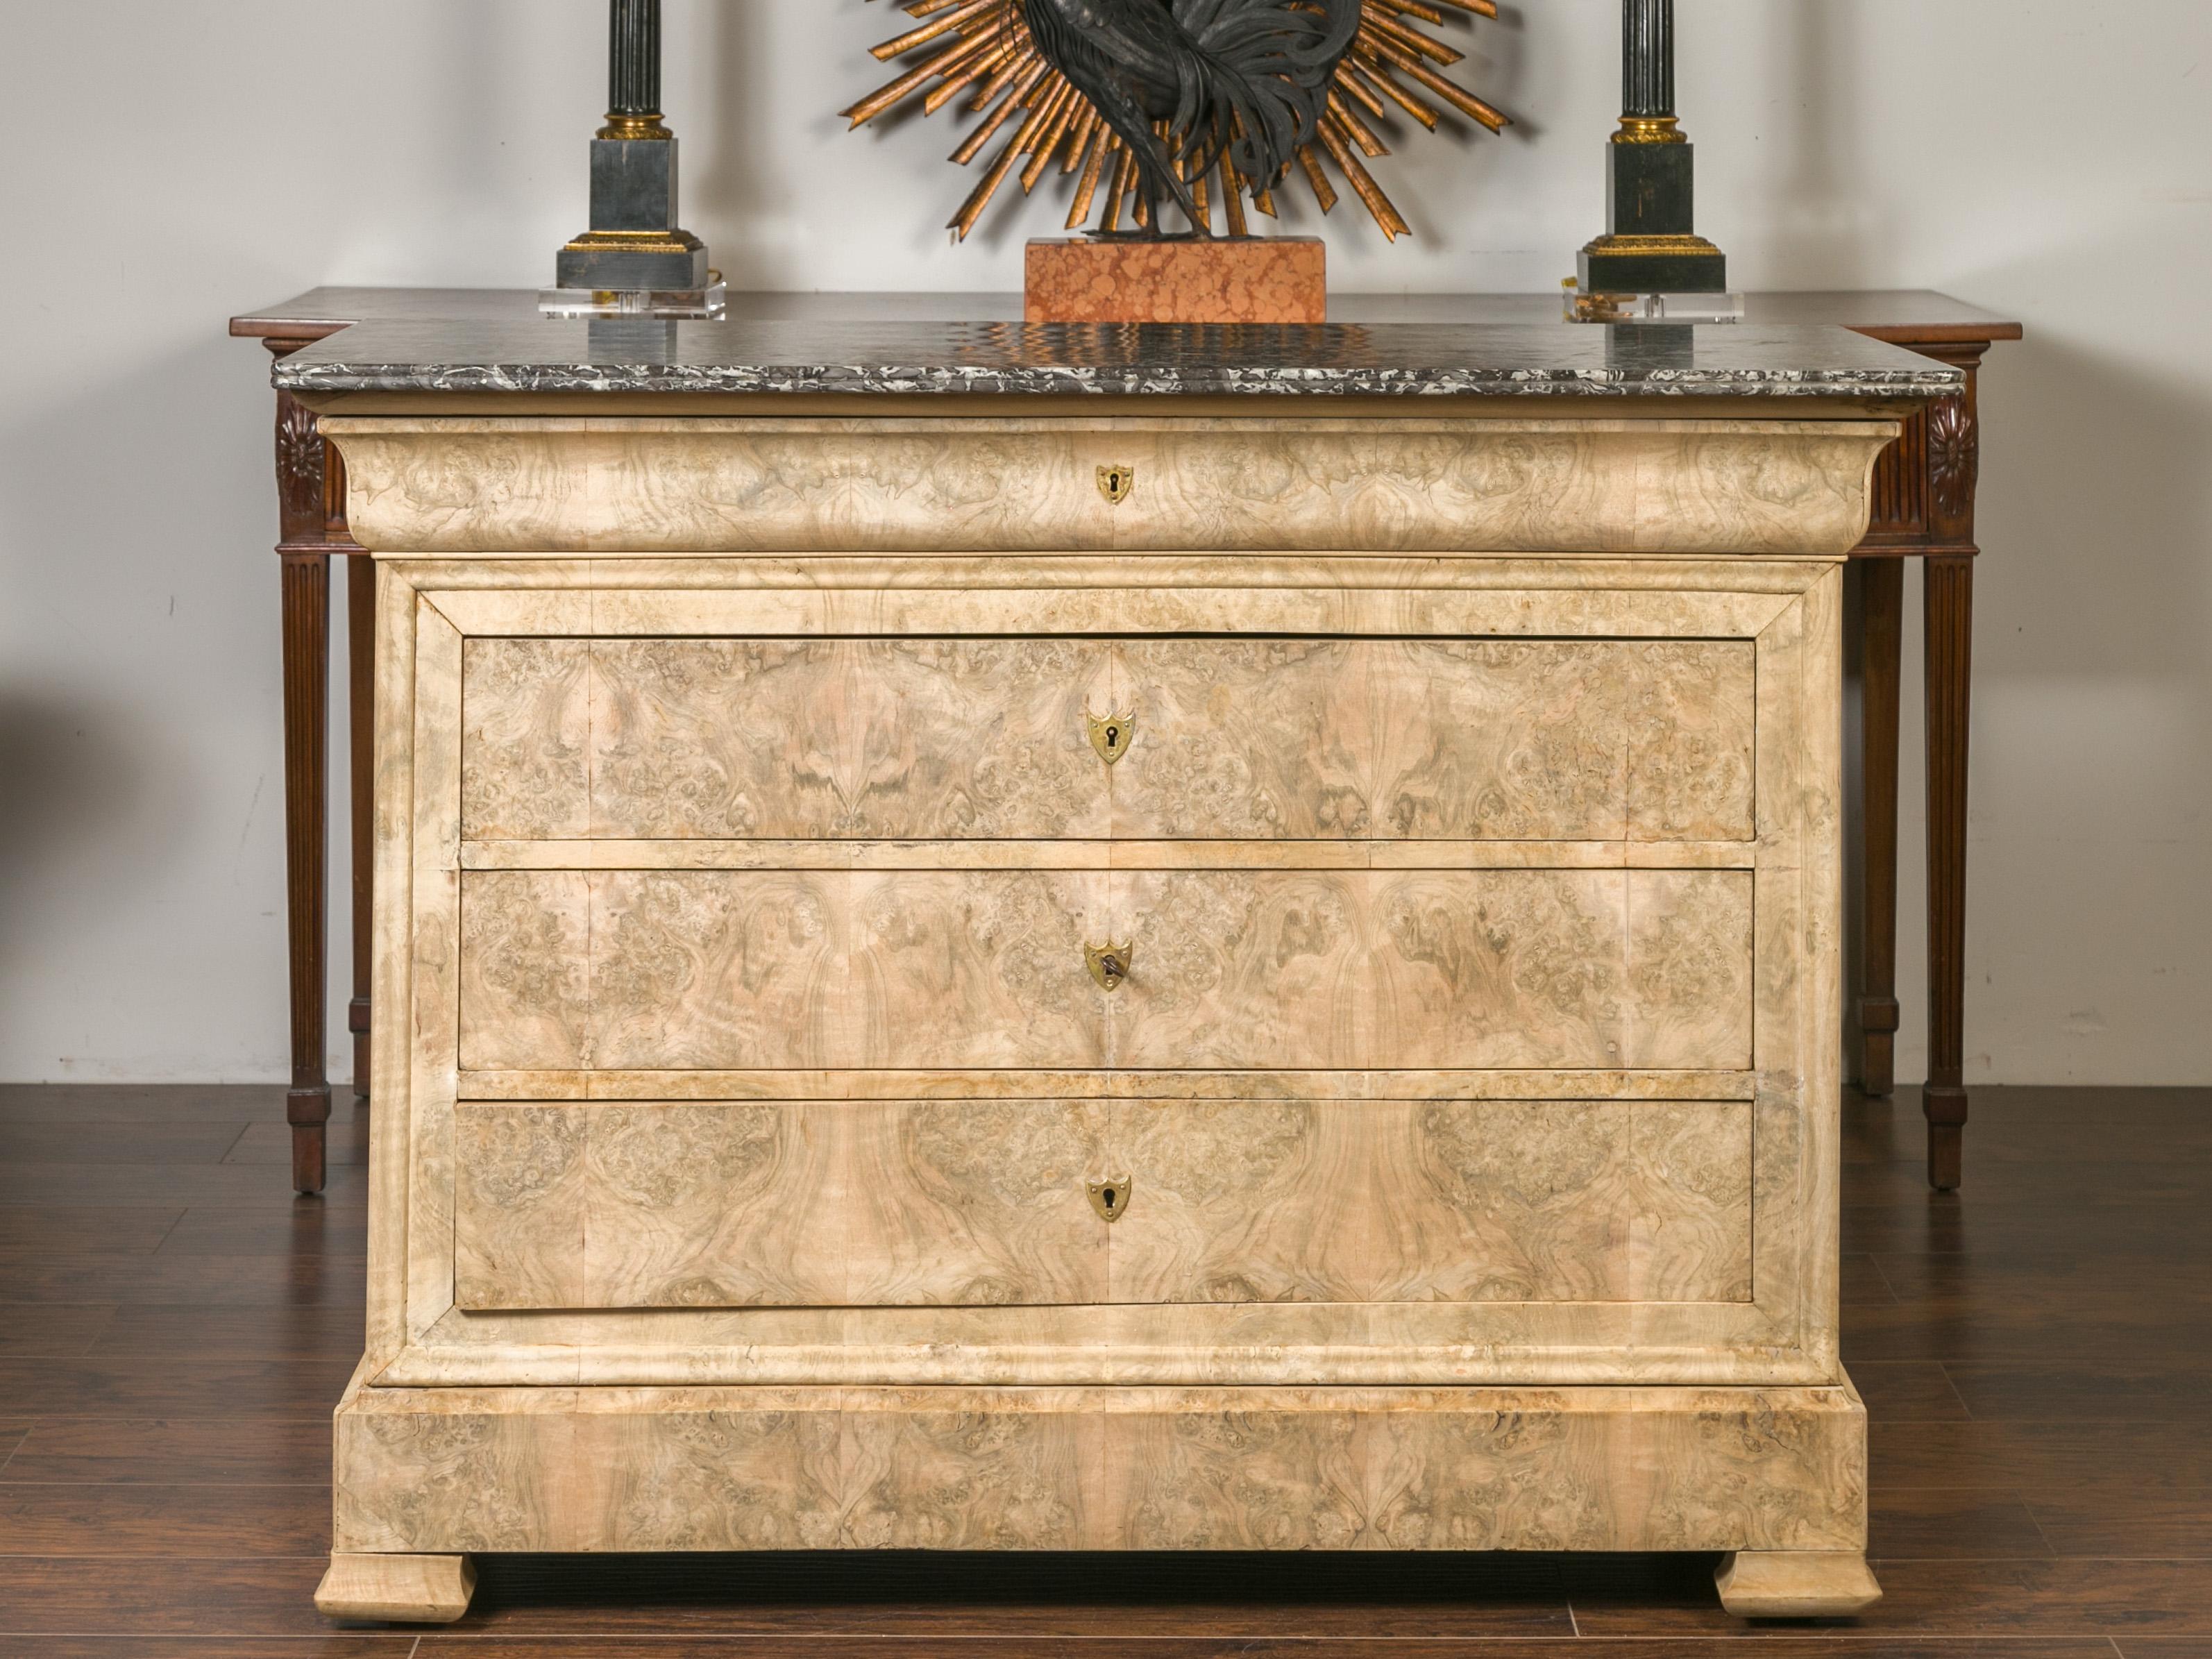 A French Louis-Philippe style bleached burl wood commode from the late 19th century, with grey marble top and five drawers. Born in France during the third quarter of the 19th century, this Louis-Philippe commode features a rectangular variegated